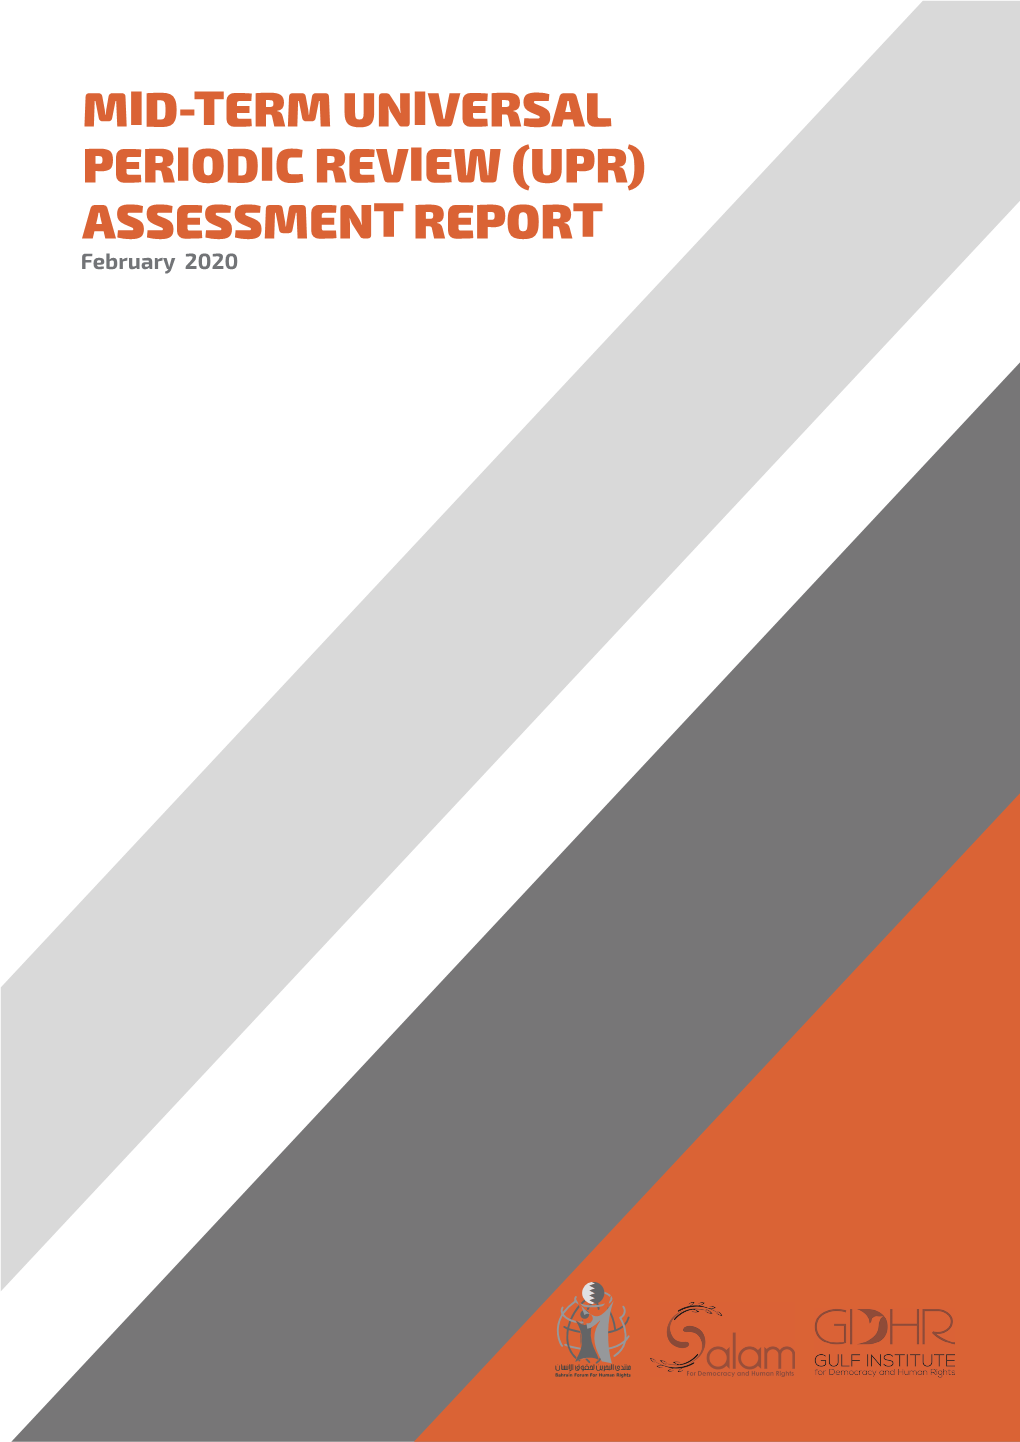 February 2020 Mid-Term Universal Periodic Review (UPR) Assessment Report - February 2020